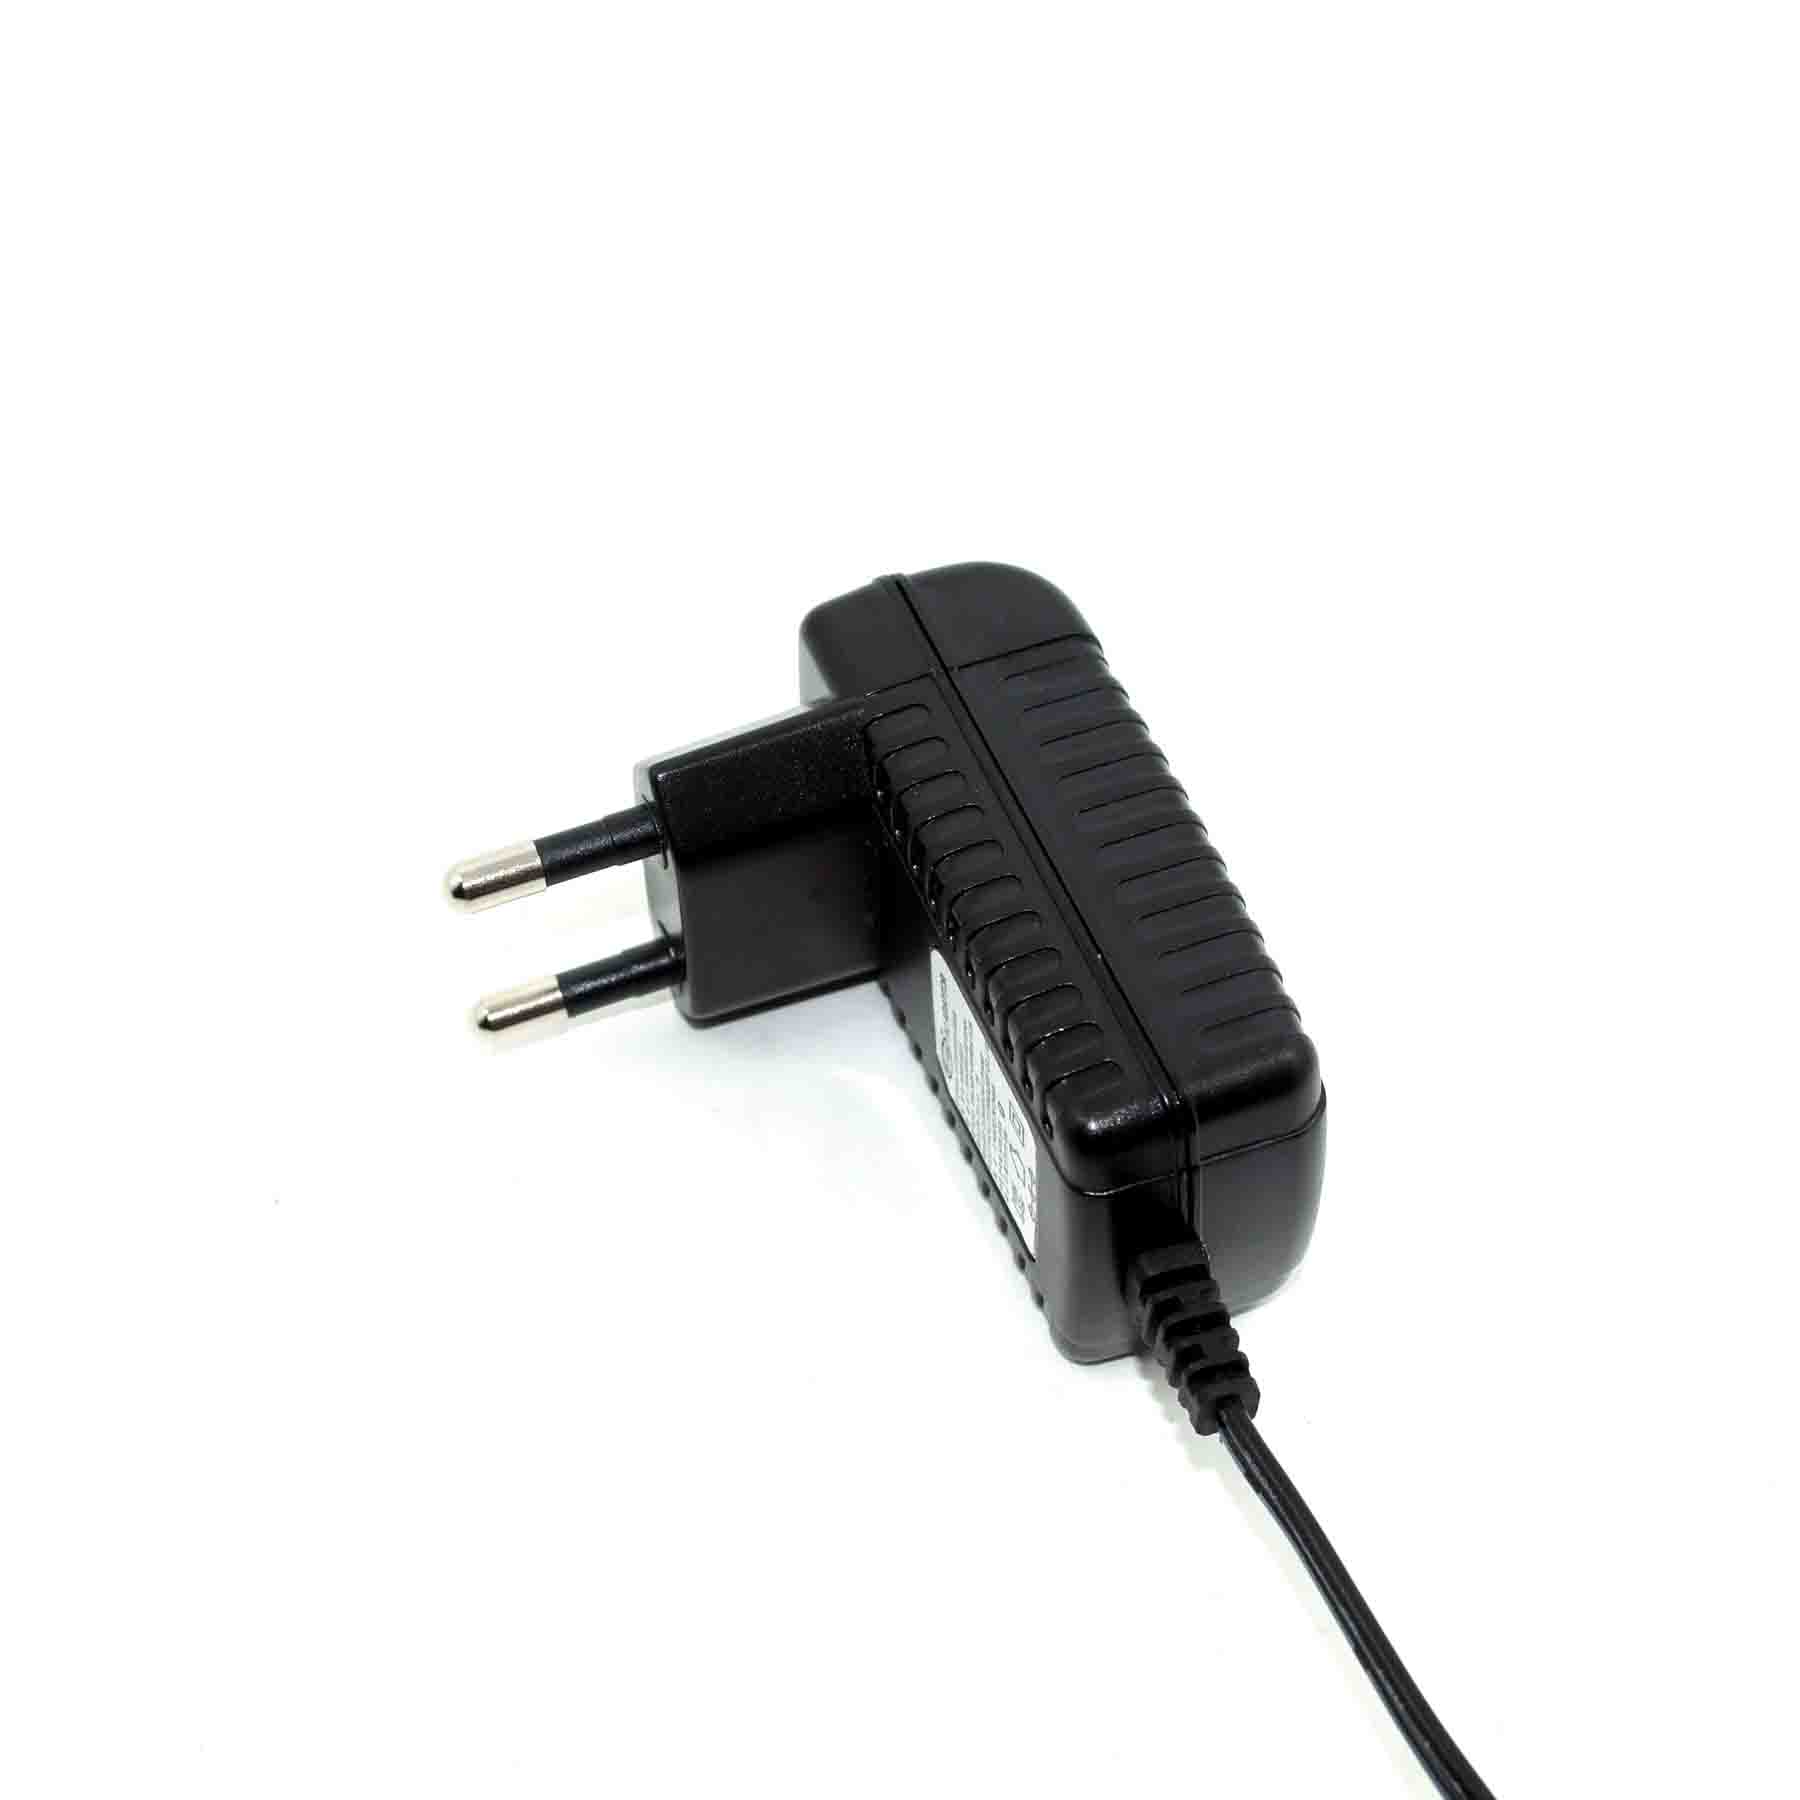 6VDC 0.6A 3.6W CE AC/DC switching adapter